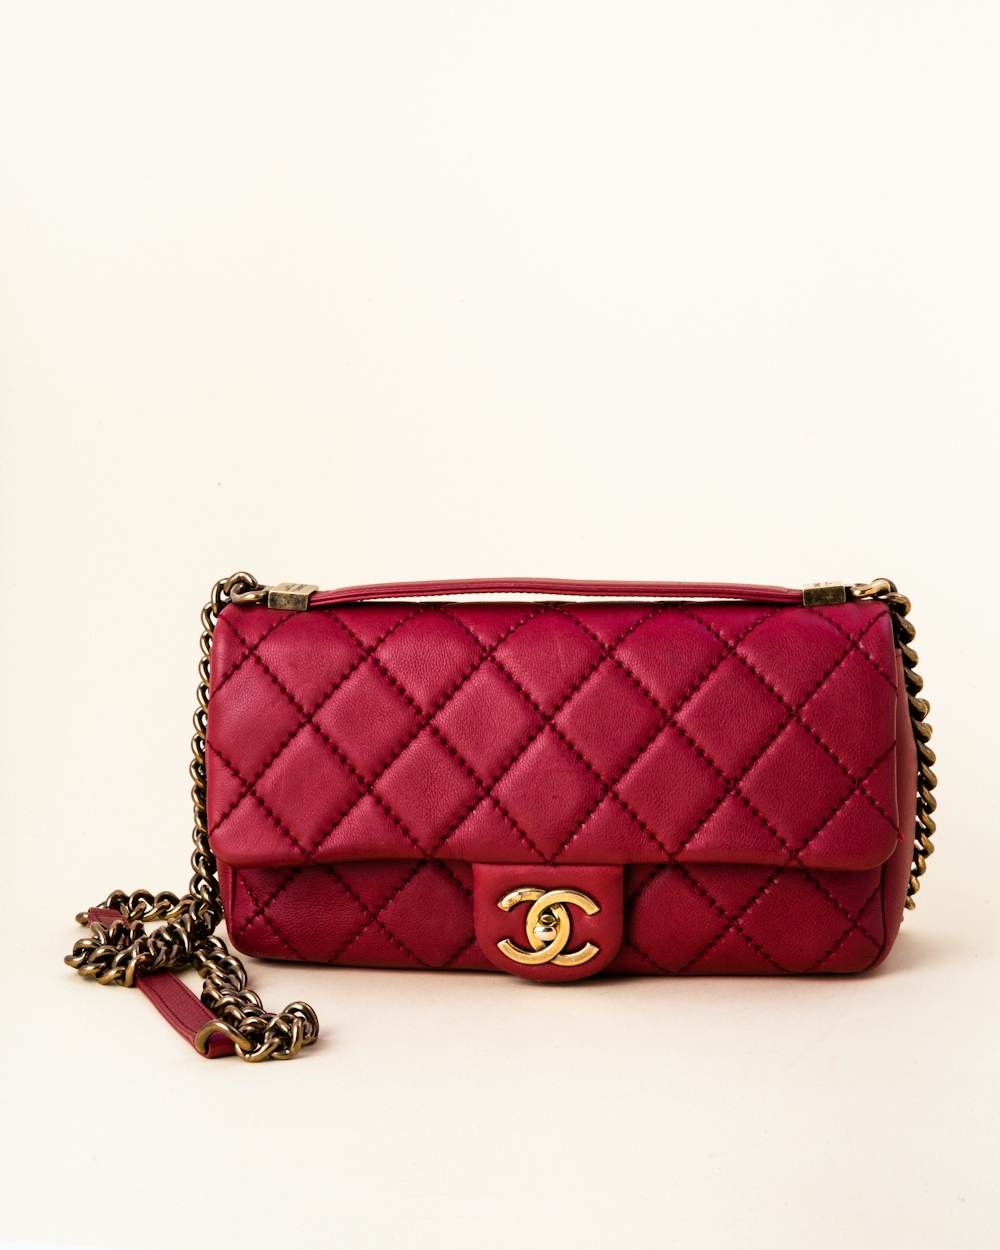 Chanel Lambskin Quilted Urban Day Medium Flap Bag